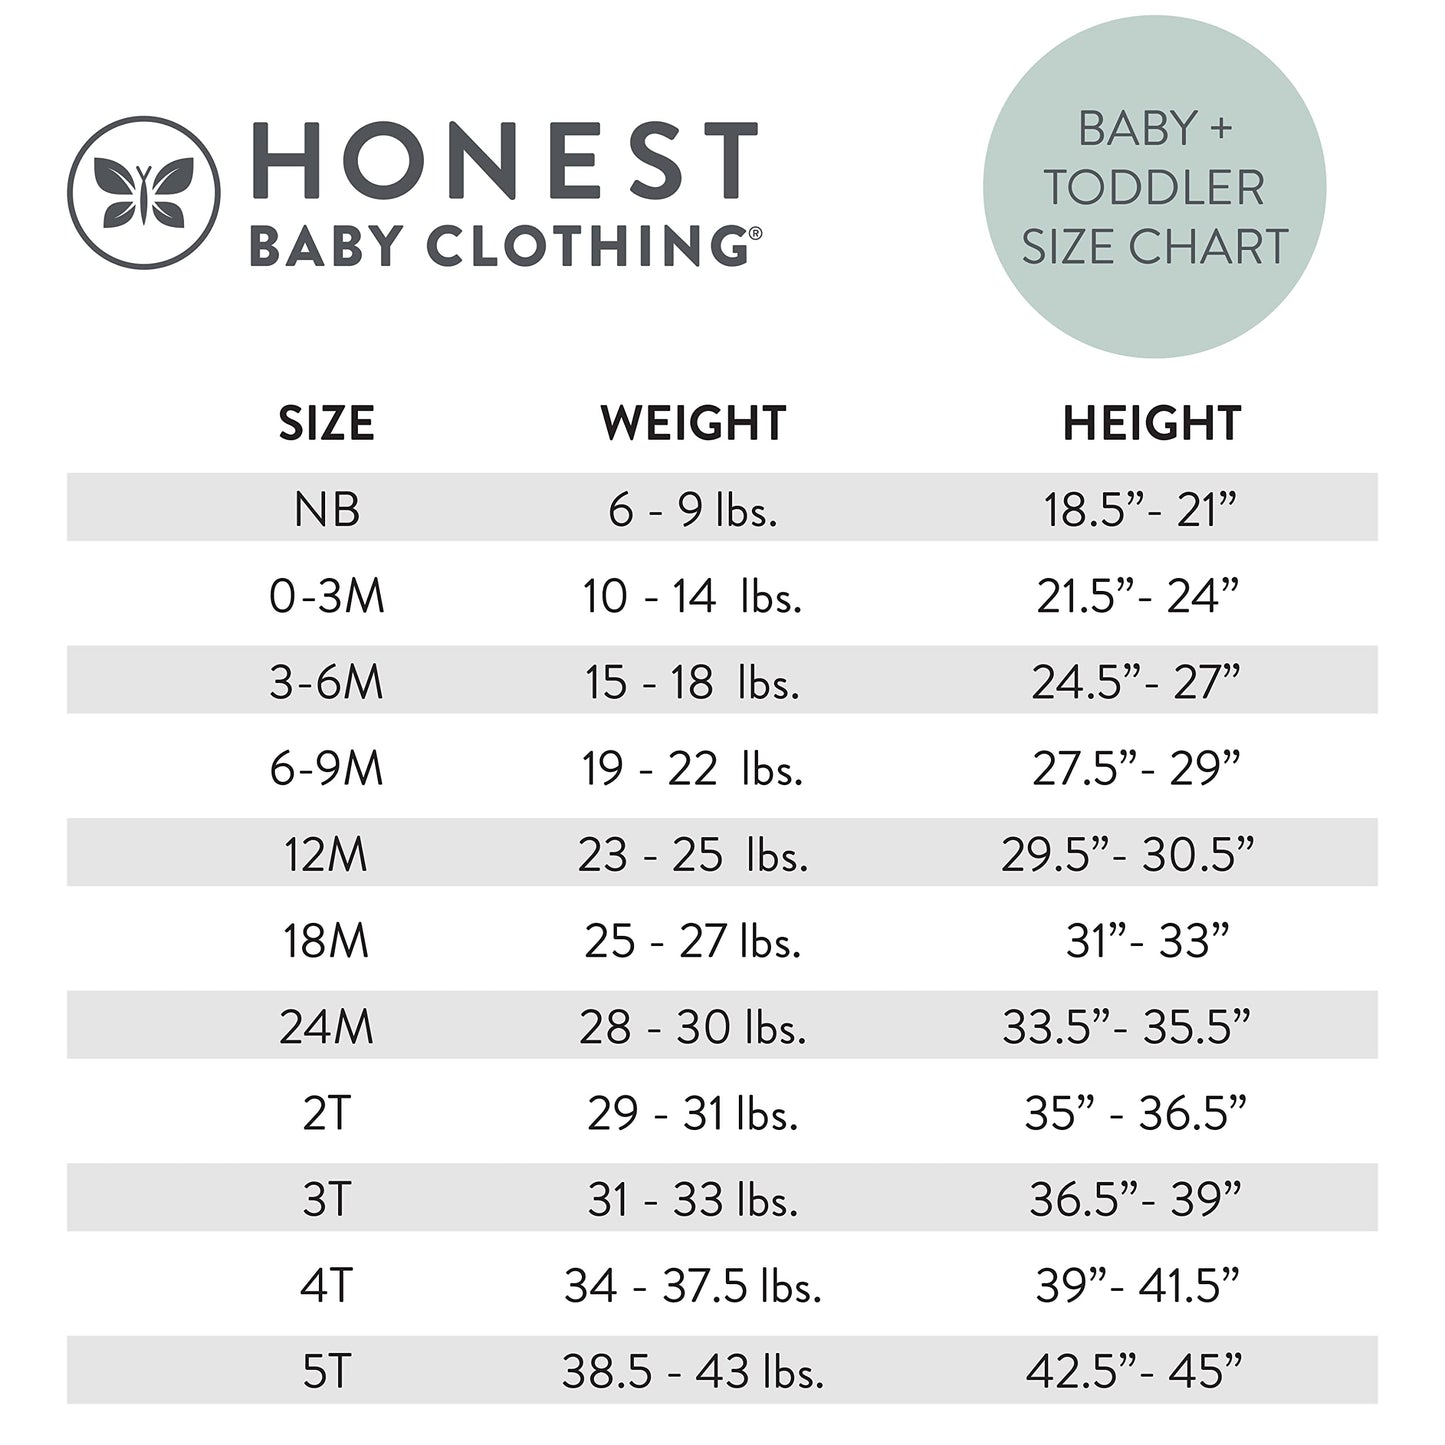 The Honest Company Unisex Kids Organic Cotton Short Sleeve T-Shirt Multi-Pack Baby and Toddler T-Shirt Set 2Y